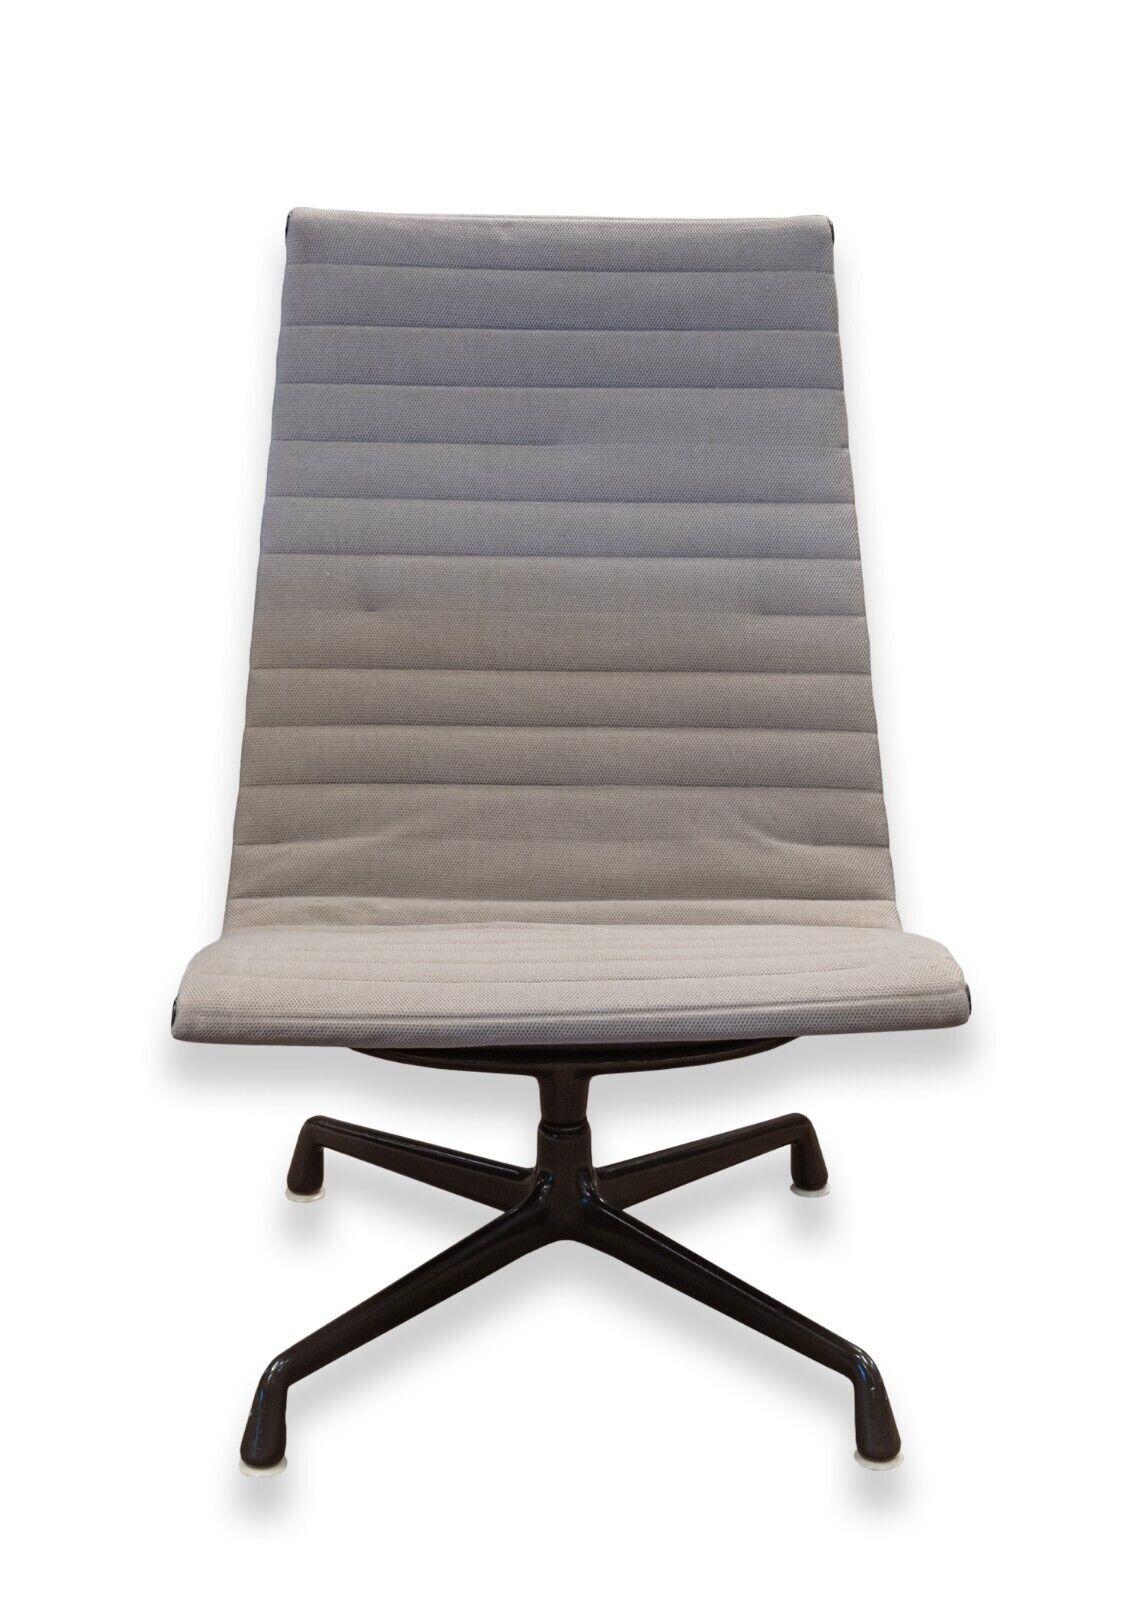 An early mid century modern Eames for Herman Miller aluminum group swivel chair. A super iconic piece from Eames and Herman Miller featuring a full aluminum frame construction, a super soft grey fabric upholstery, and a super smooth swiveling base.